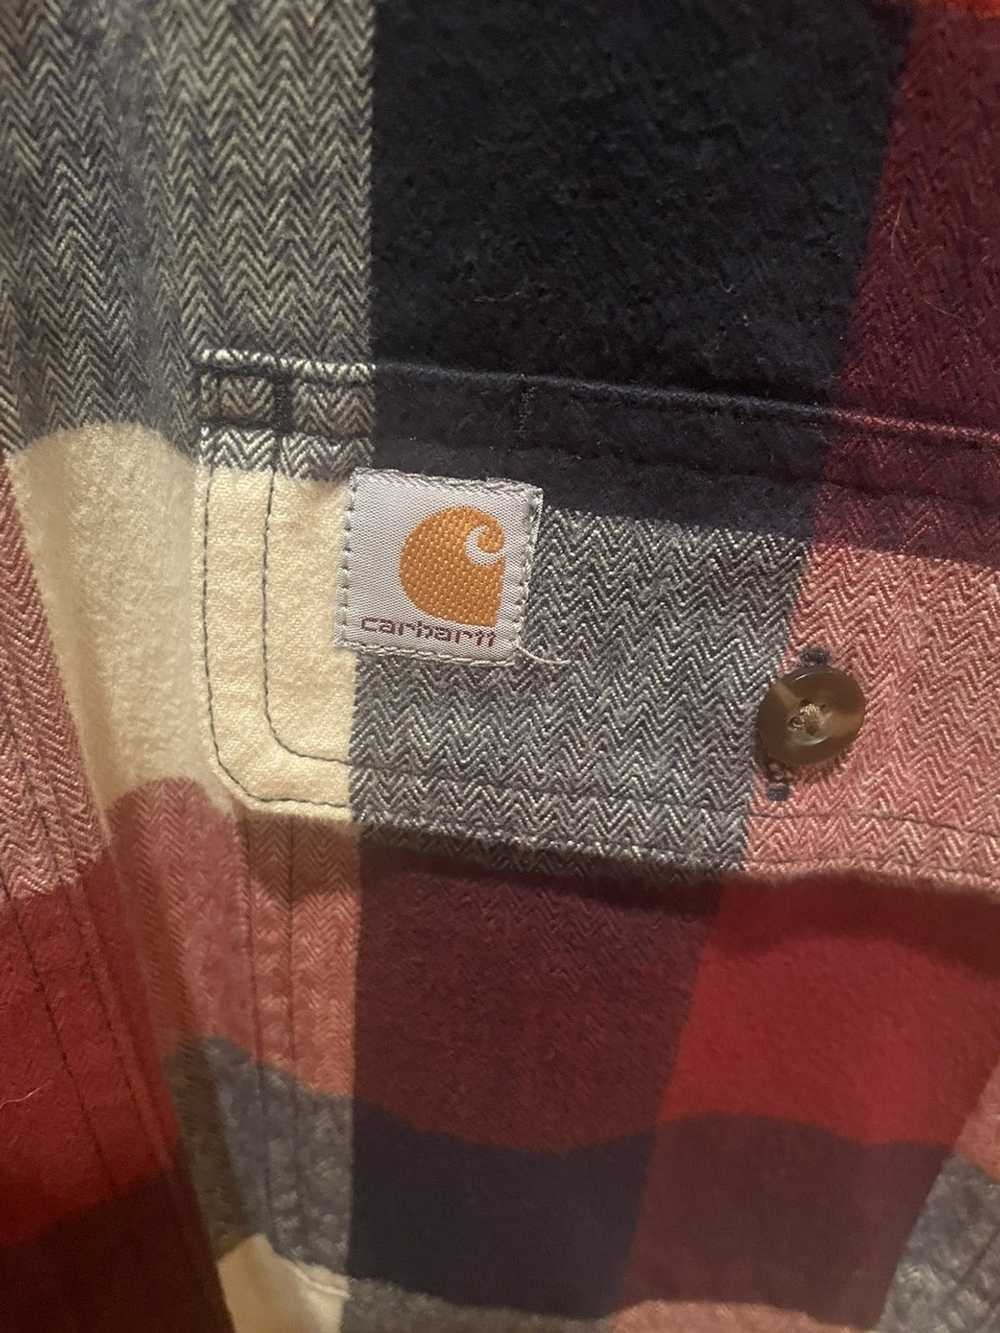 Carhartt Carhart button up flannel - image 3